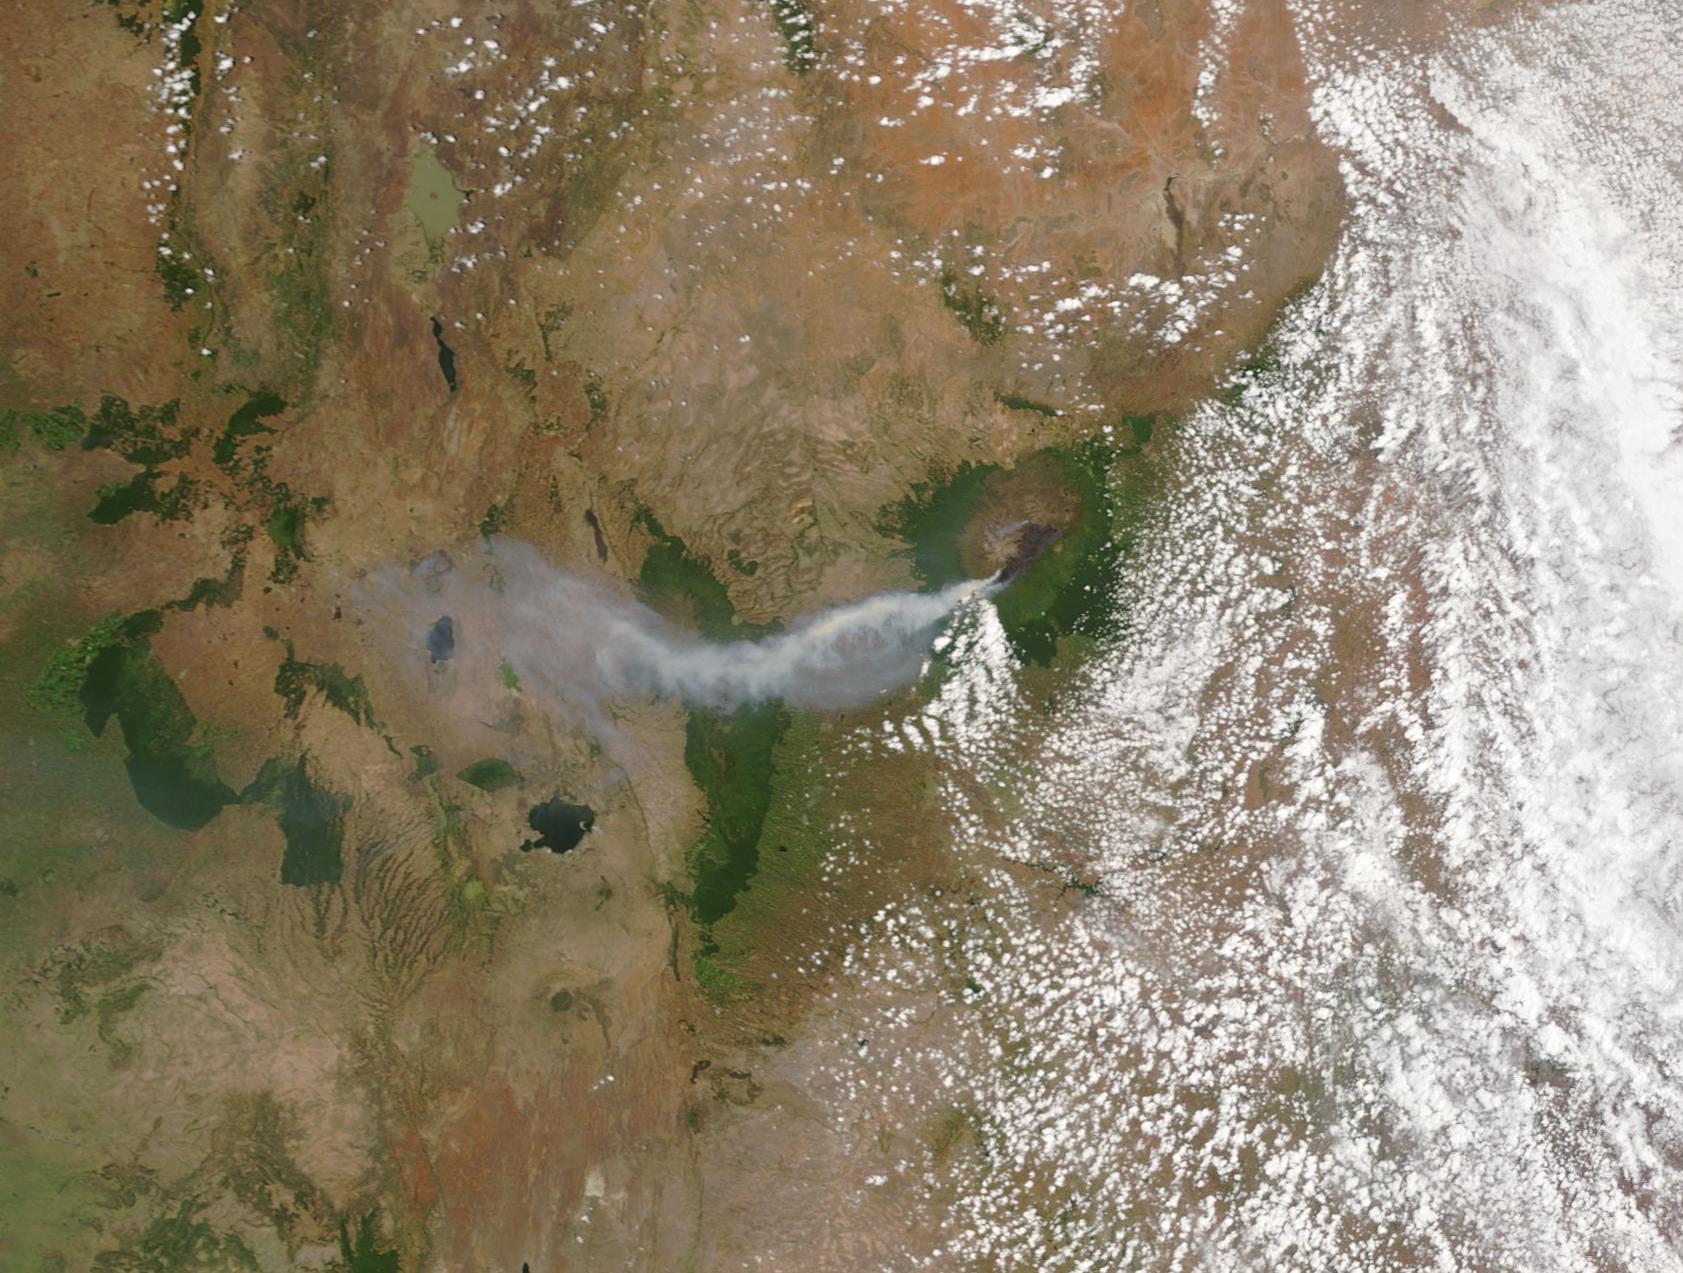 Fire on Mount Kenya - related image preview